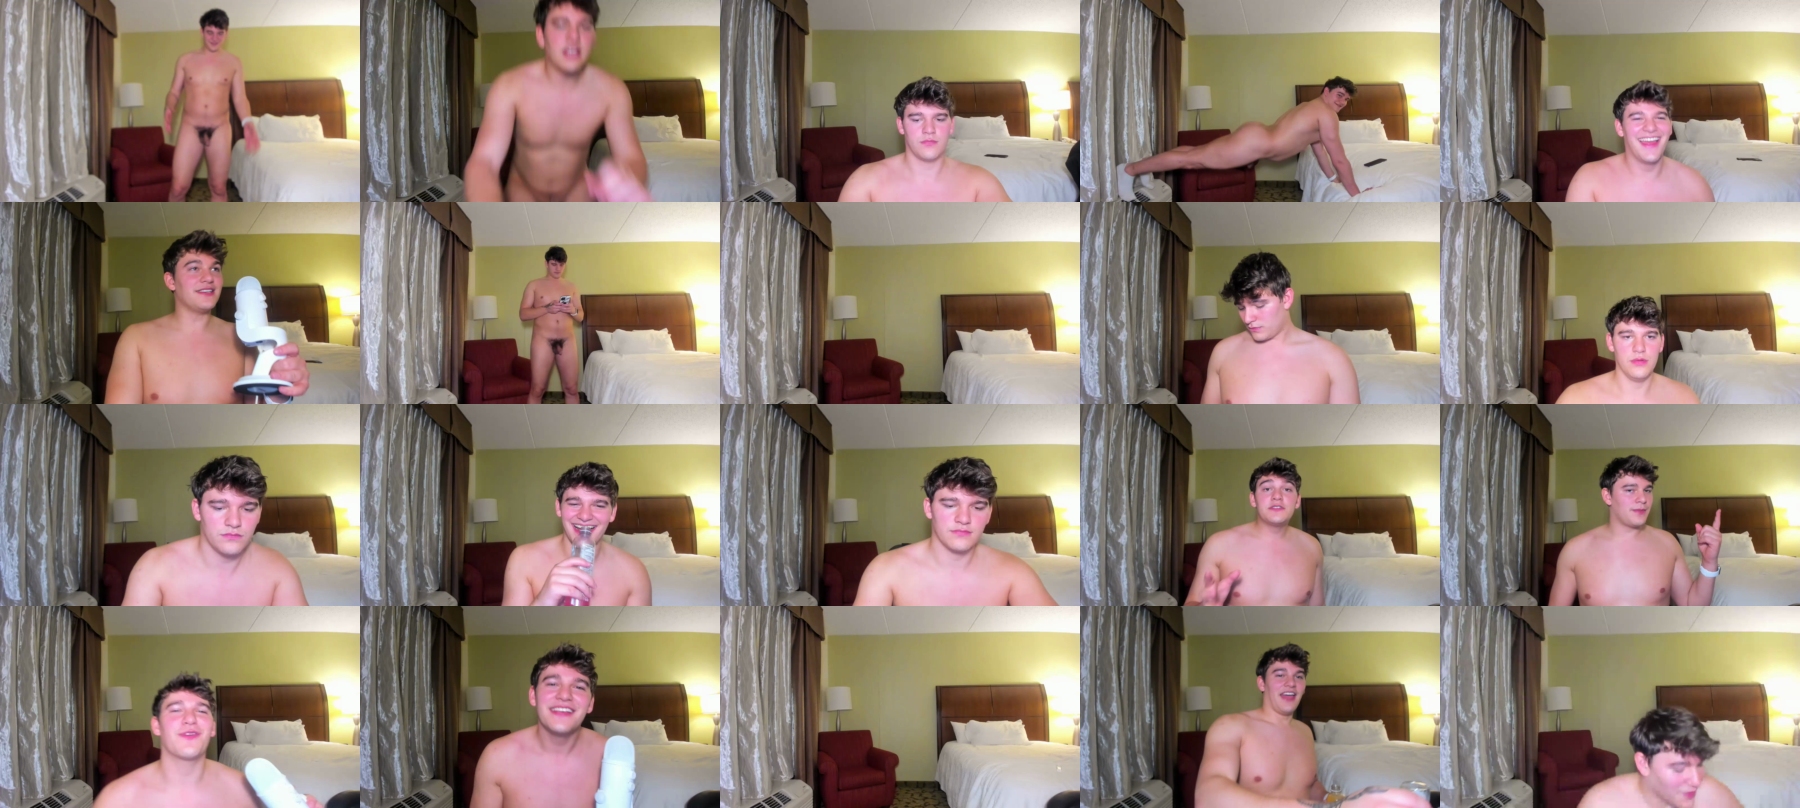 Thejohnnystone  21-10-2021 Male Naked